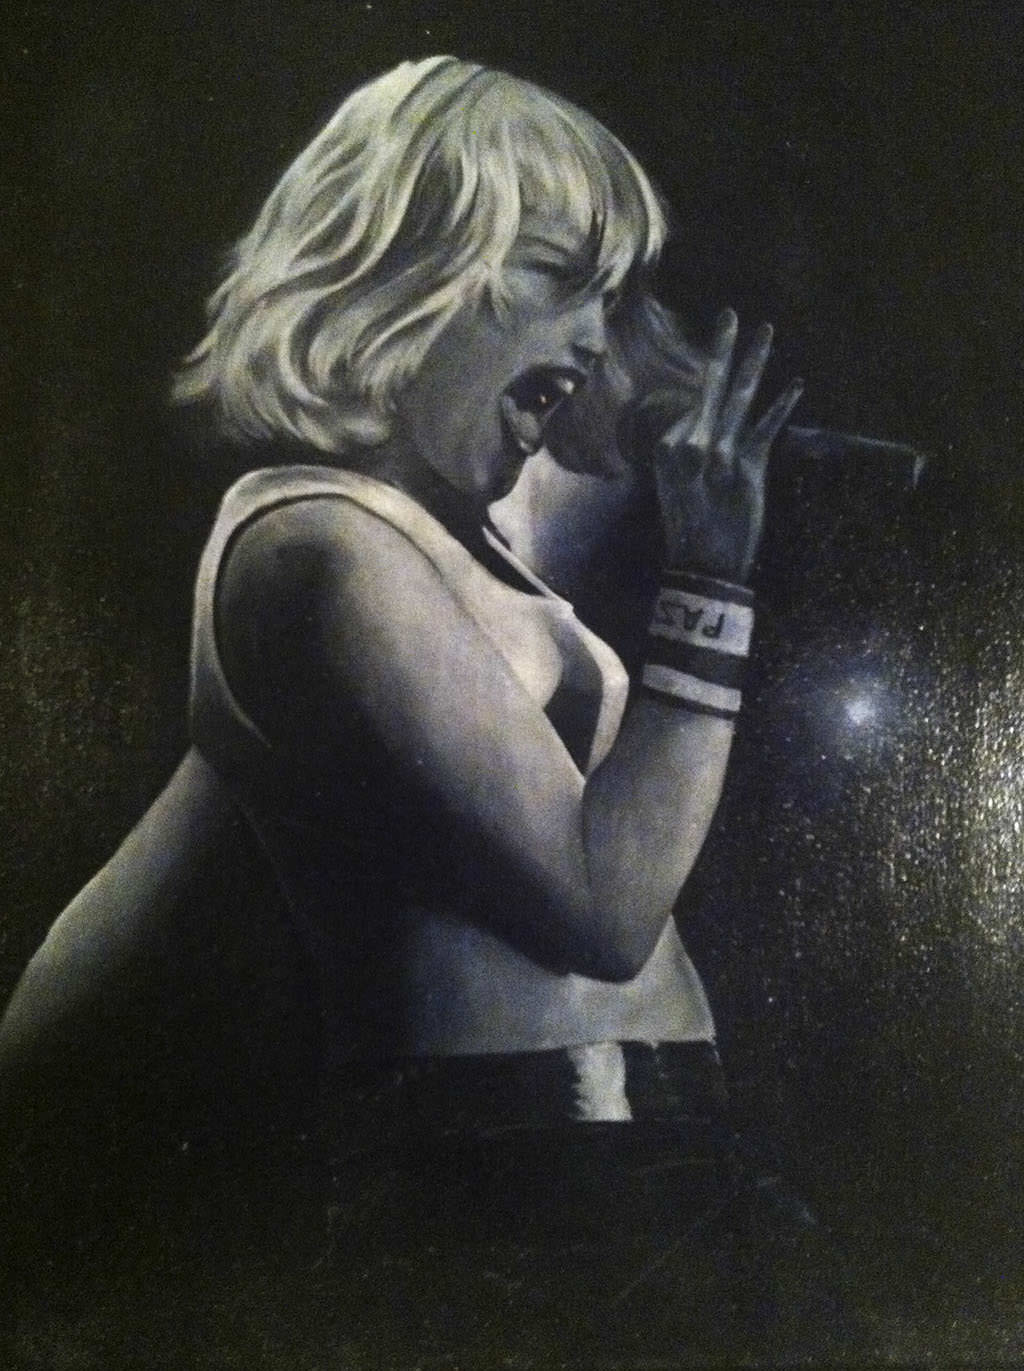 Gwen Stefani black and white oil painting painted by Perri Arts, Katy's sister.